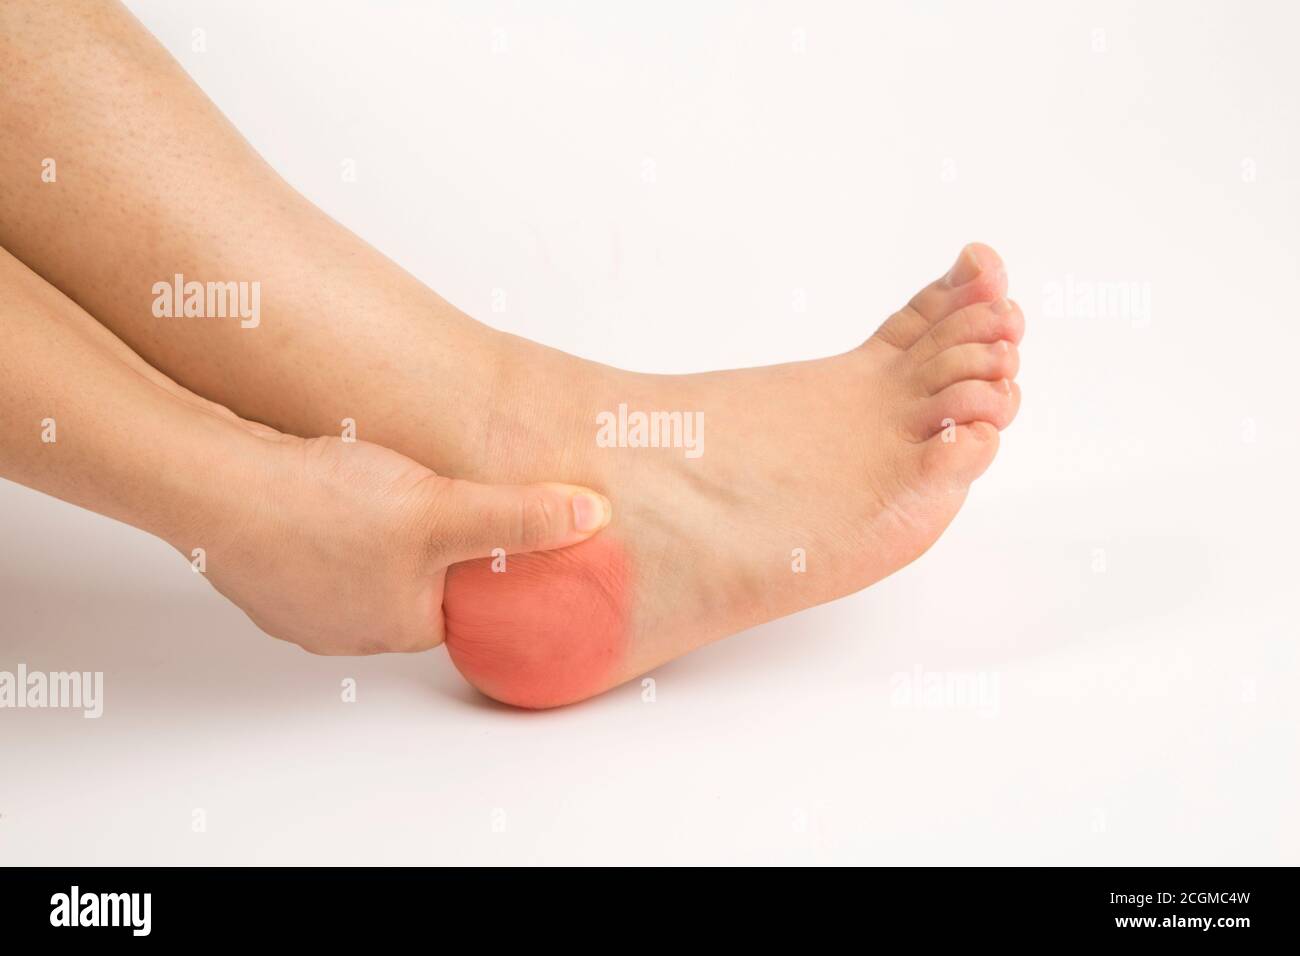 foot heel pain woman and isolated background Stock Photo